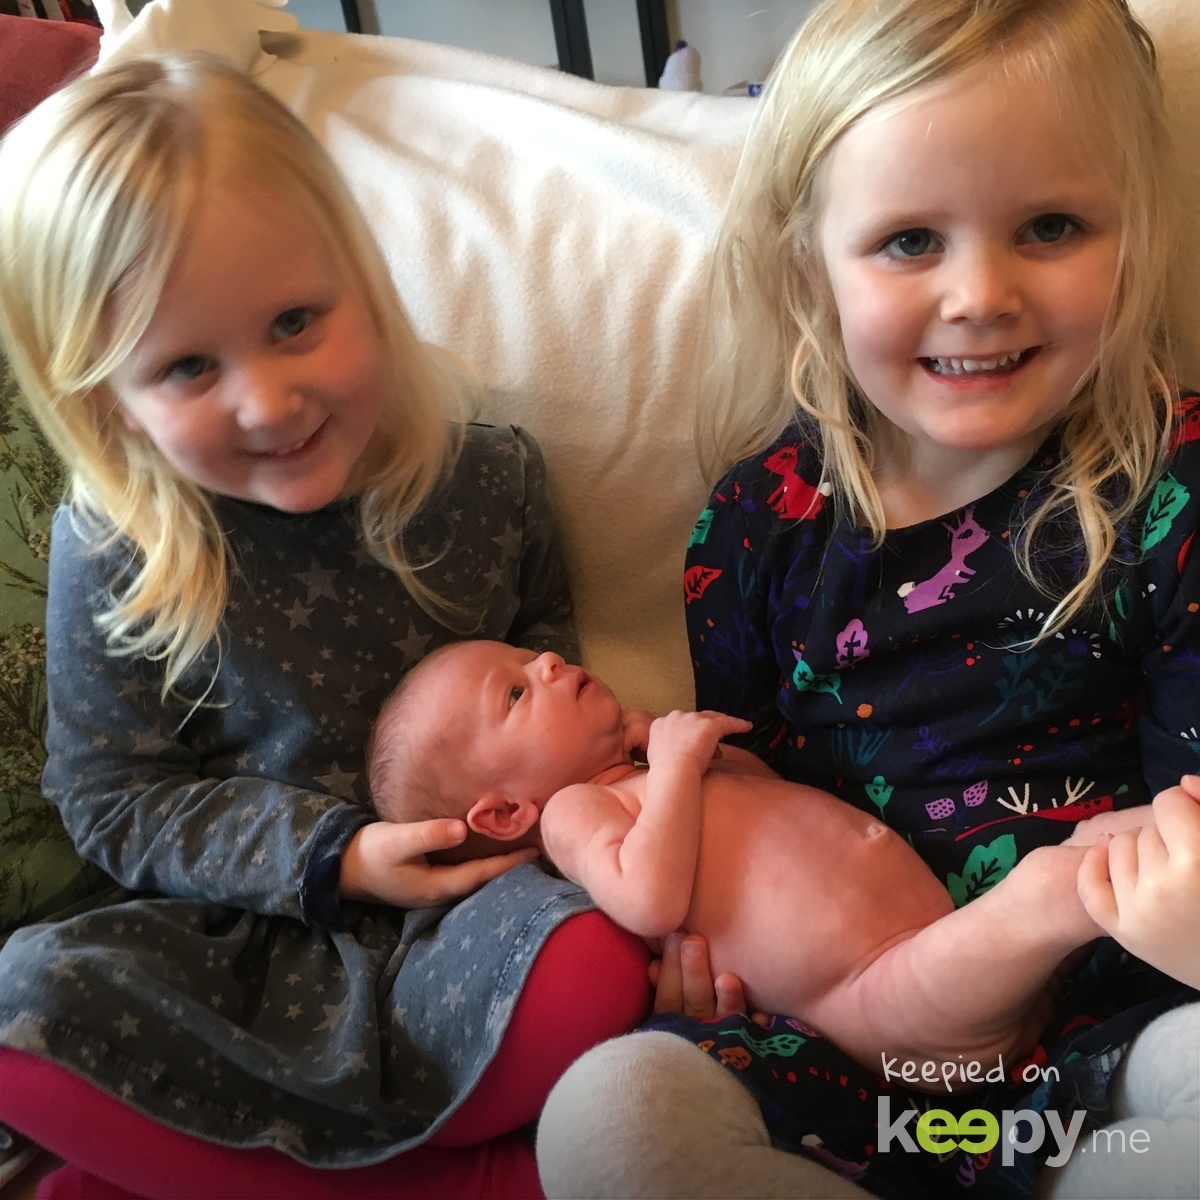 Lisa saved this awesome photo of Lily, Tessa, Wren on Keepy